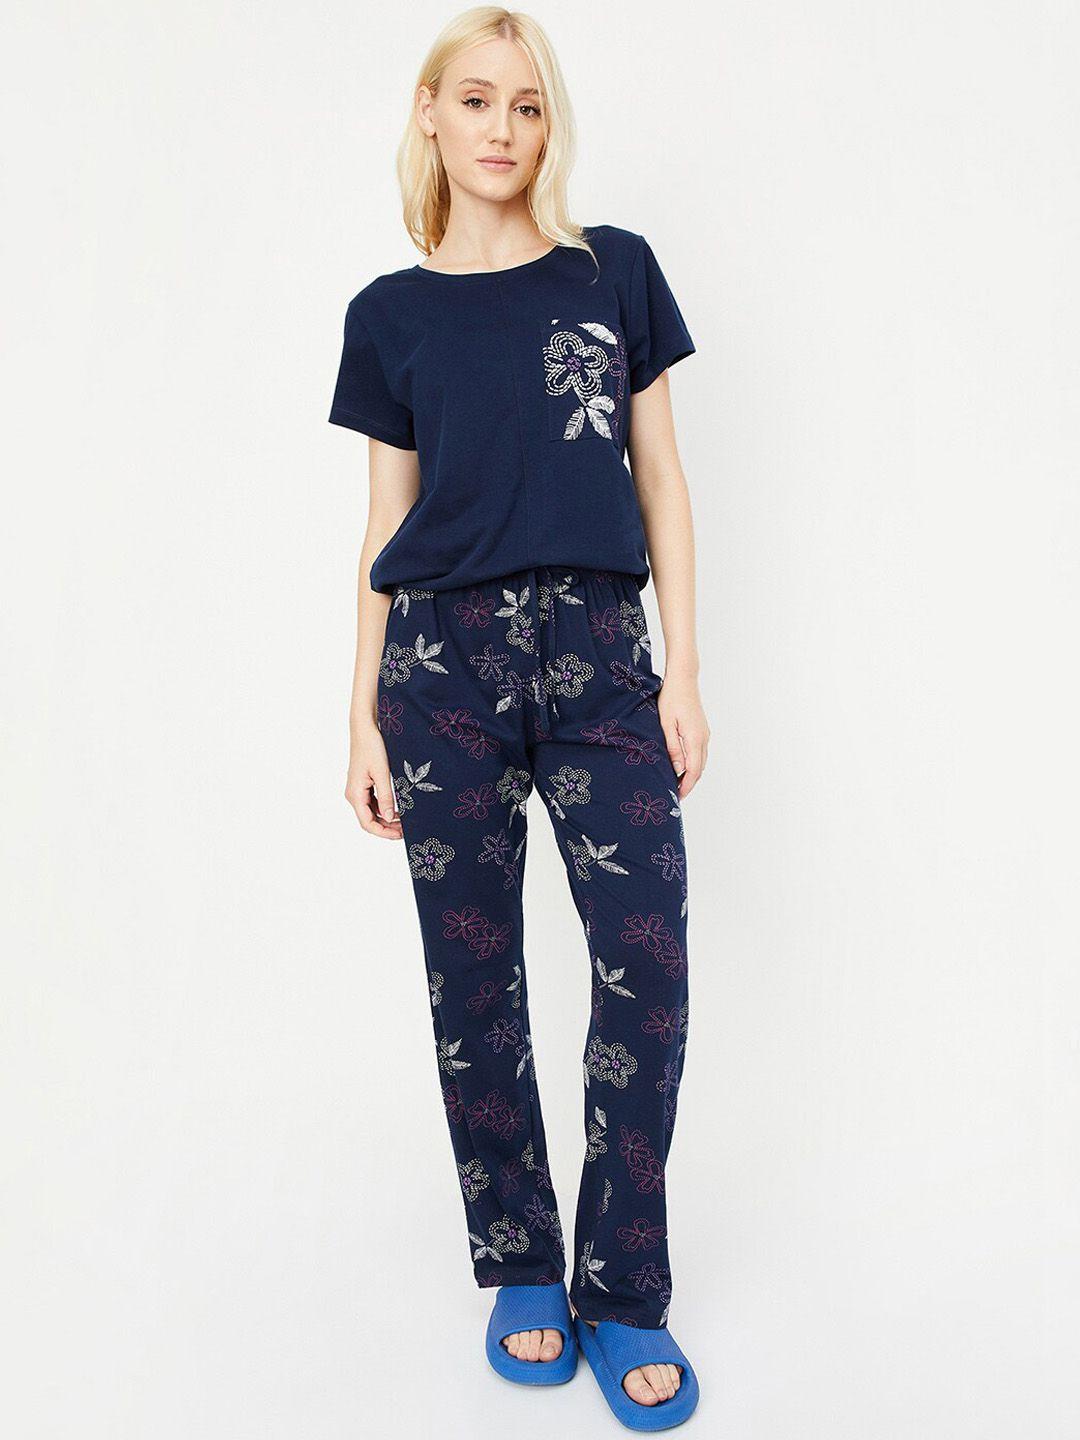 max-floral-printed-pure-cotton-night-suit